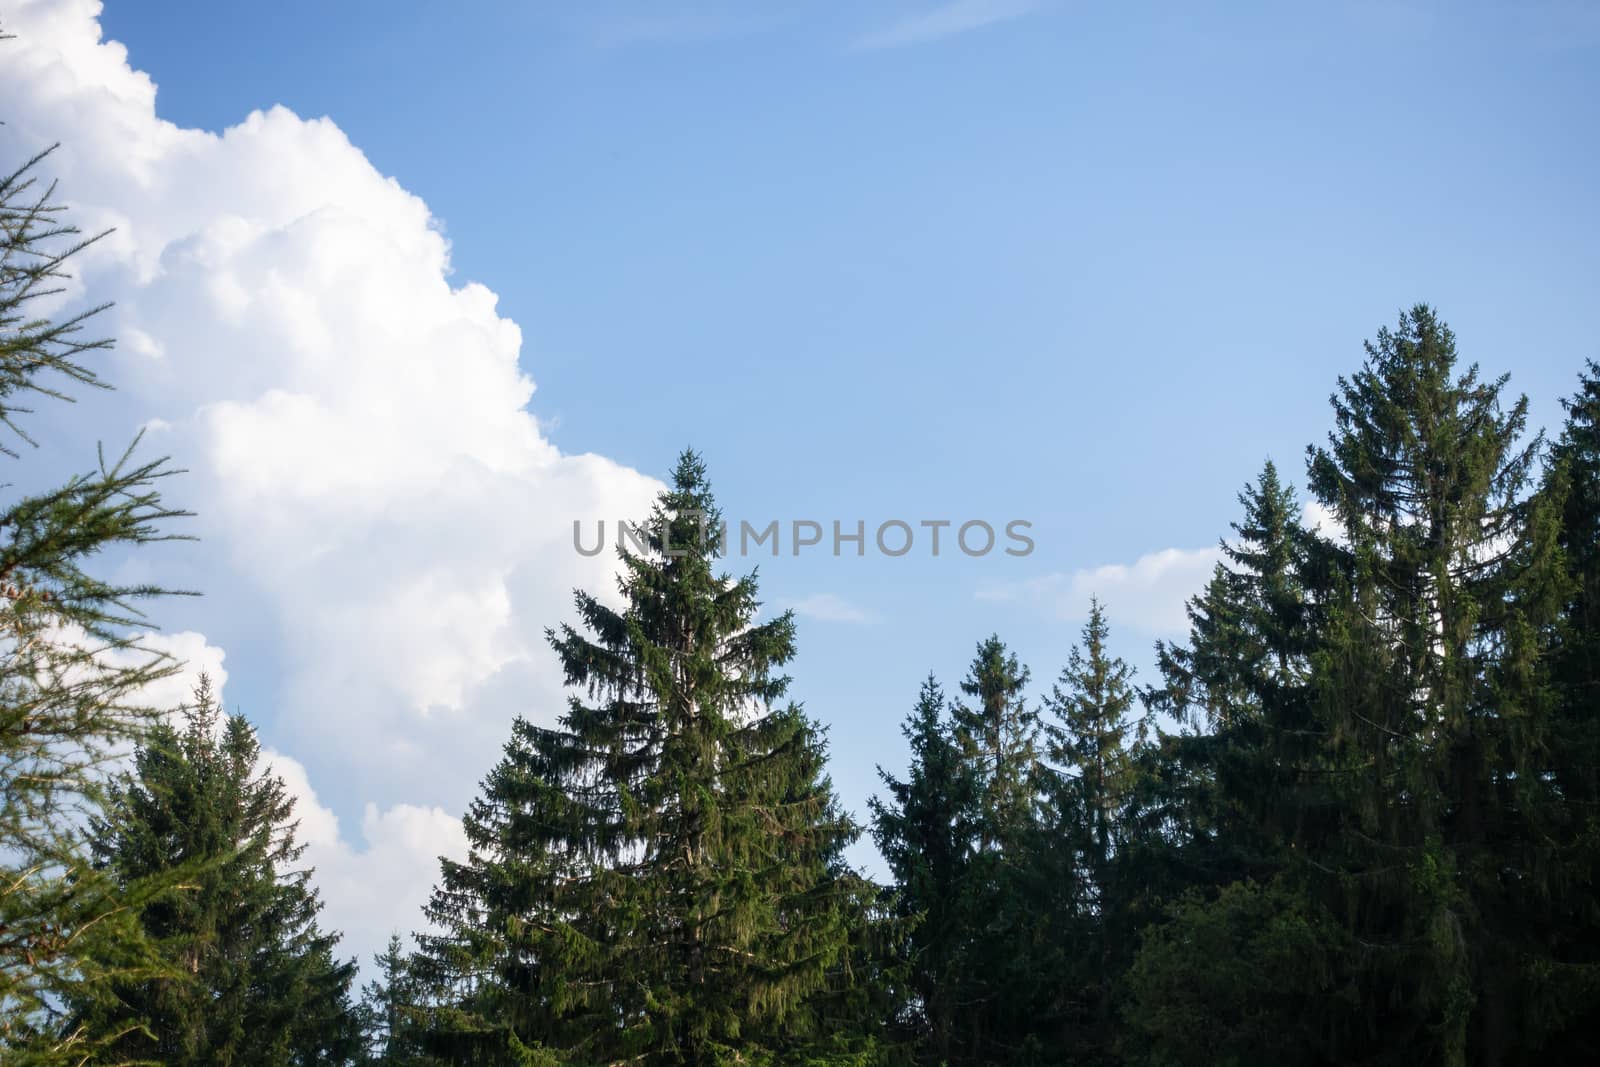 An image of fir trees blue sky with clouds background